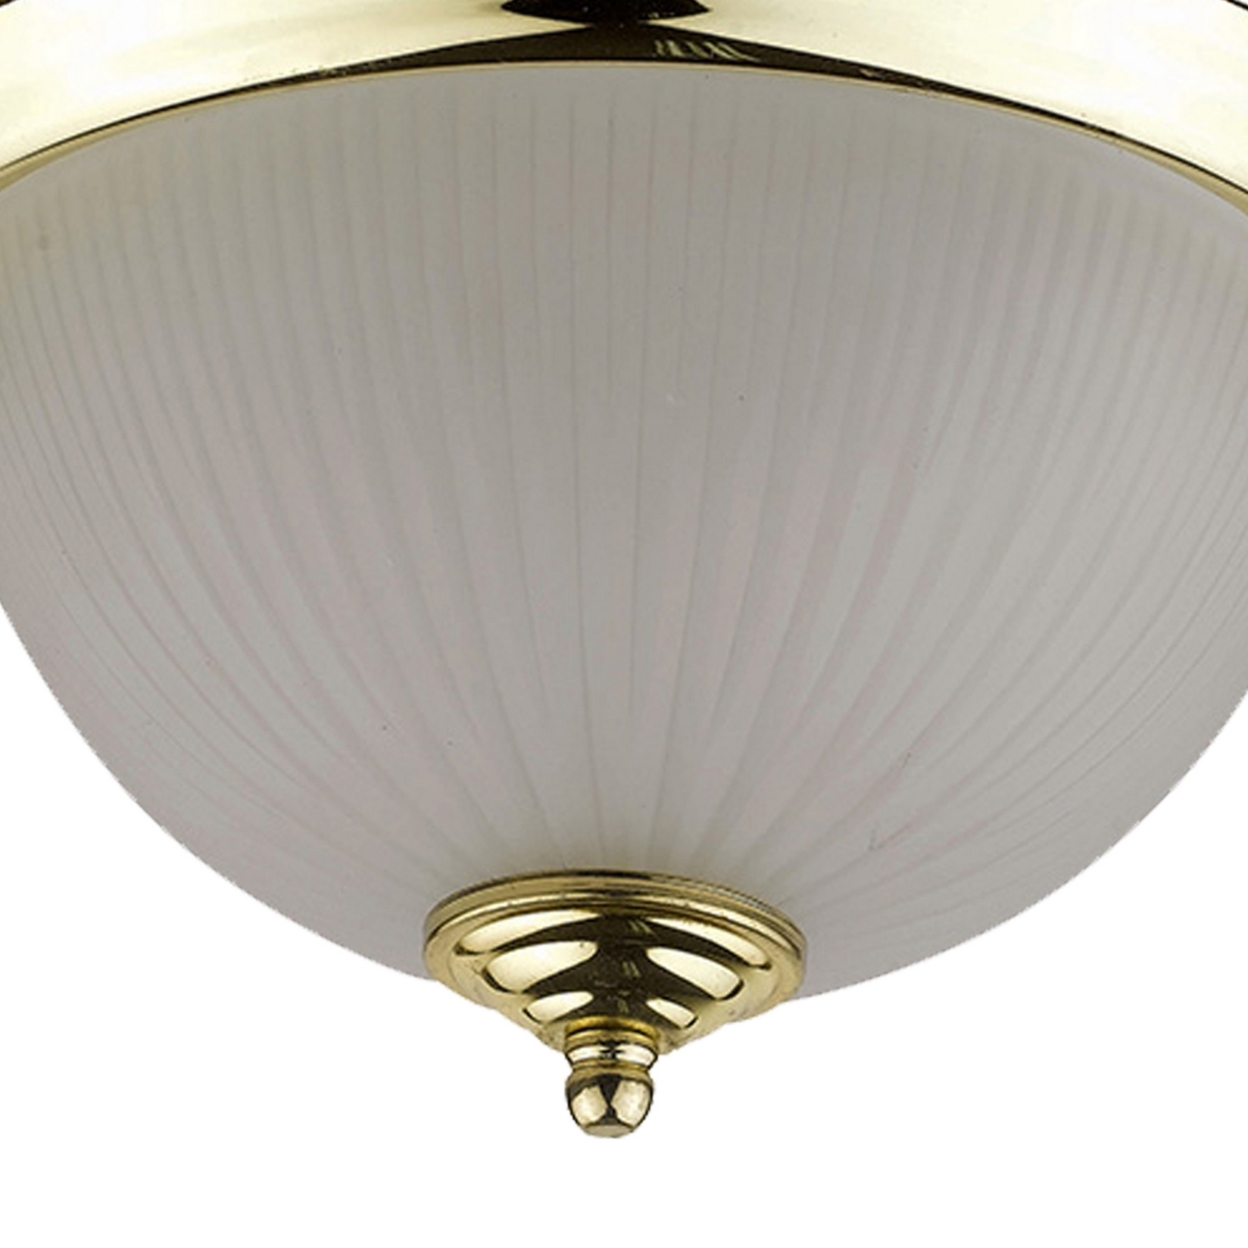 Metal Ceiling Lamp With Dome Shaped Shade And Finial Top, Clear And Gold- Saltoro Sherpi